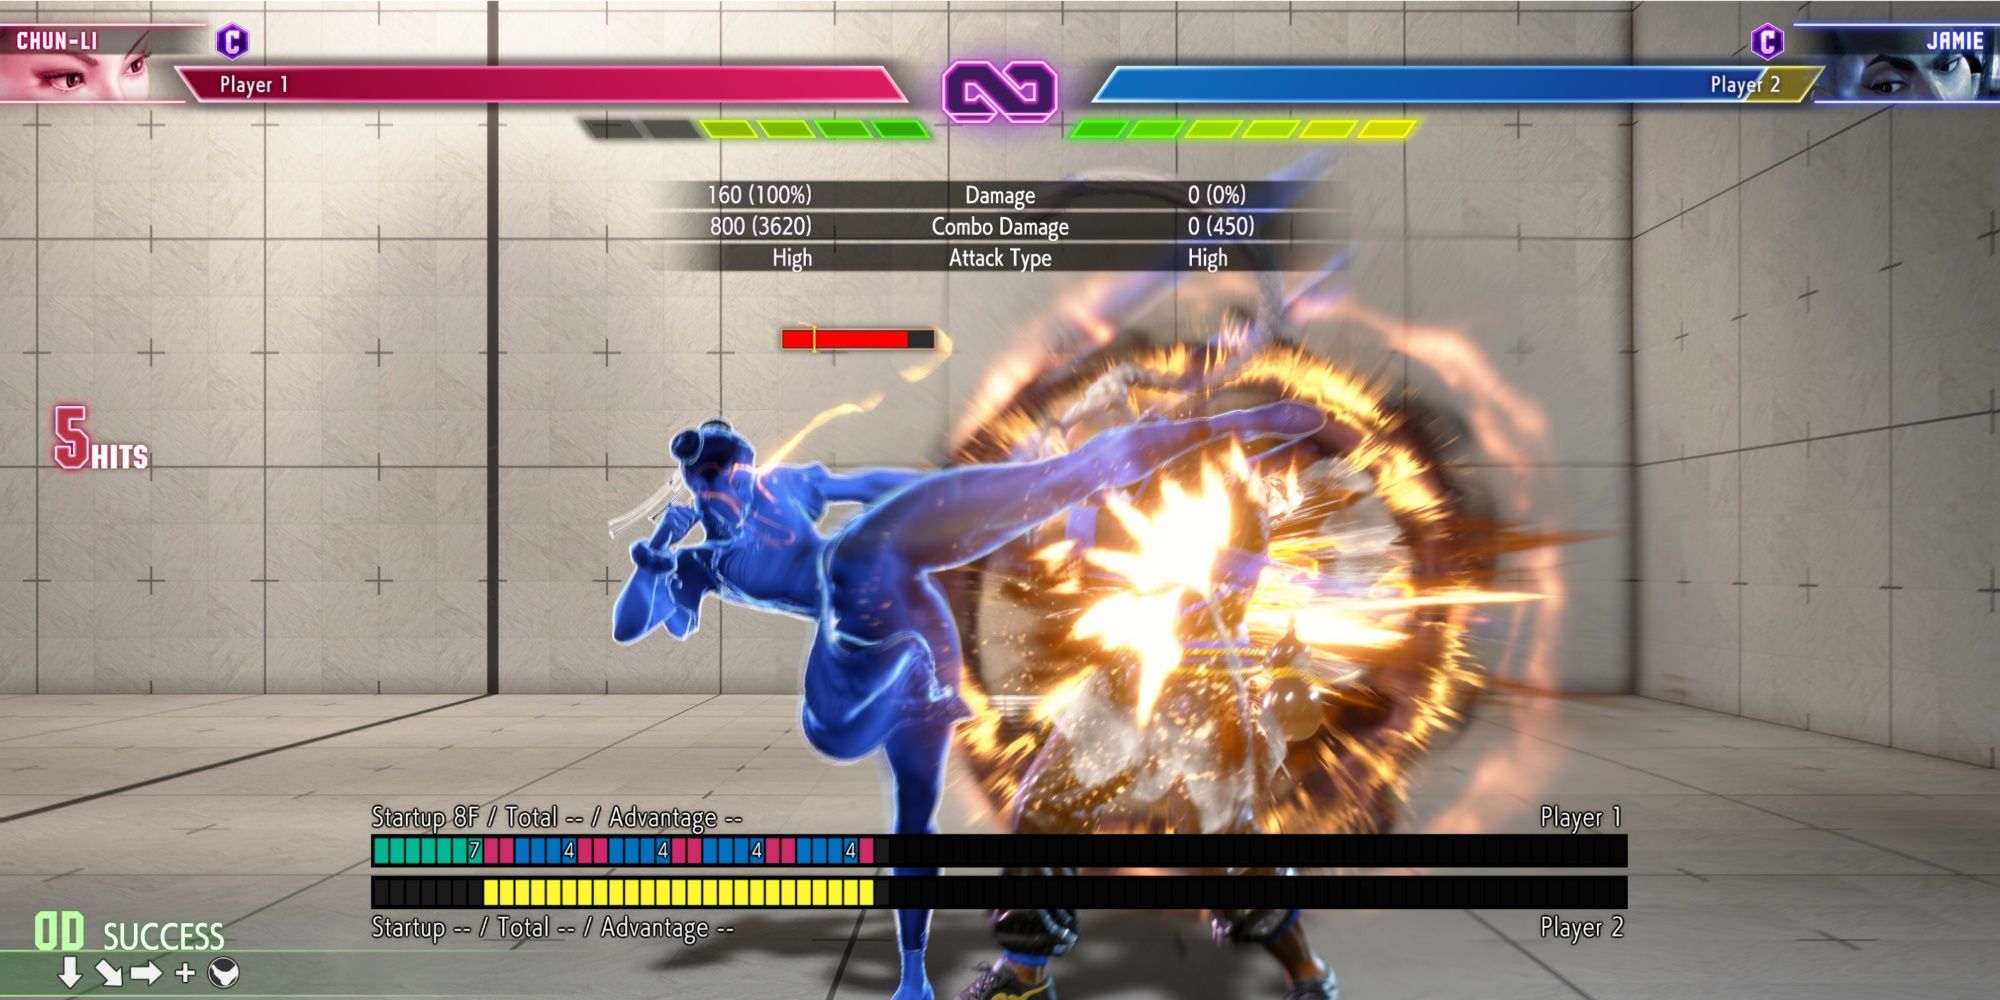 Chun-Li glowing Blue via the Cancel Timing Display setting, showcasing that she's allowed to cancel into specific Special Moves or Super Arts in Street Fighter 6